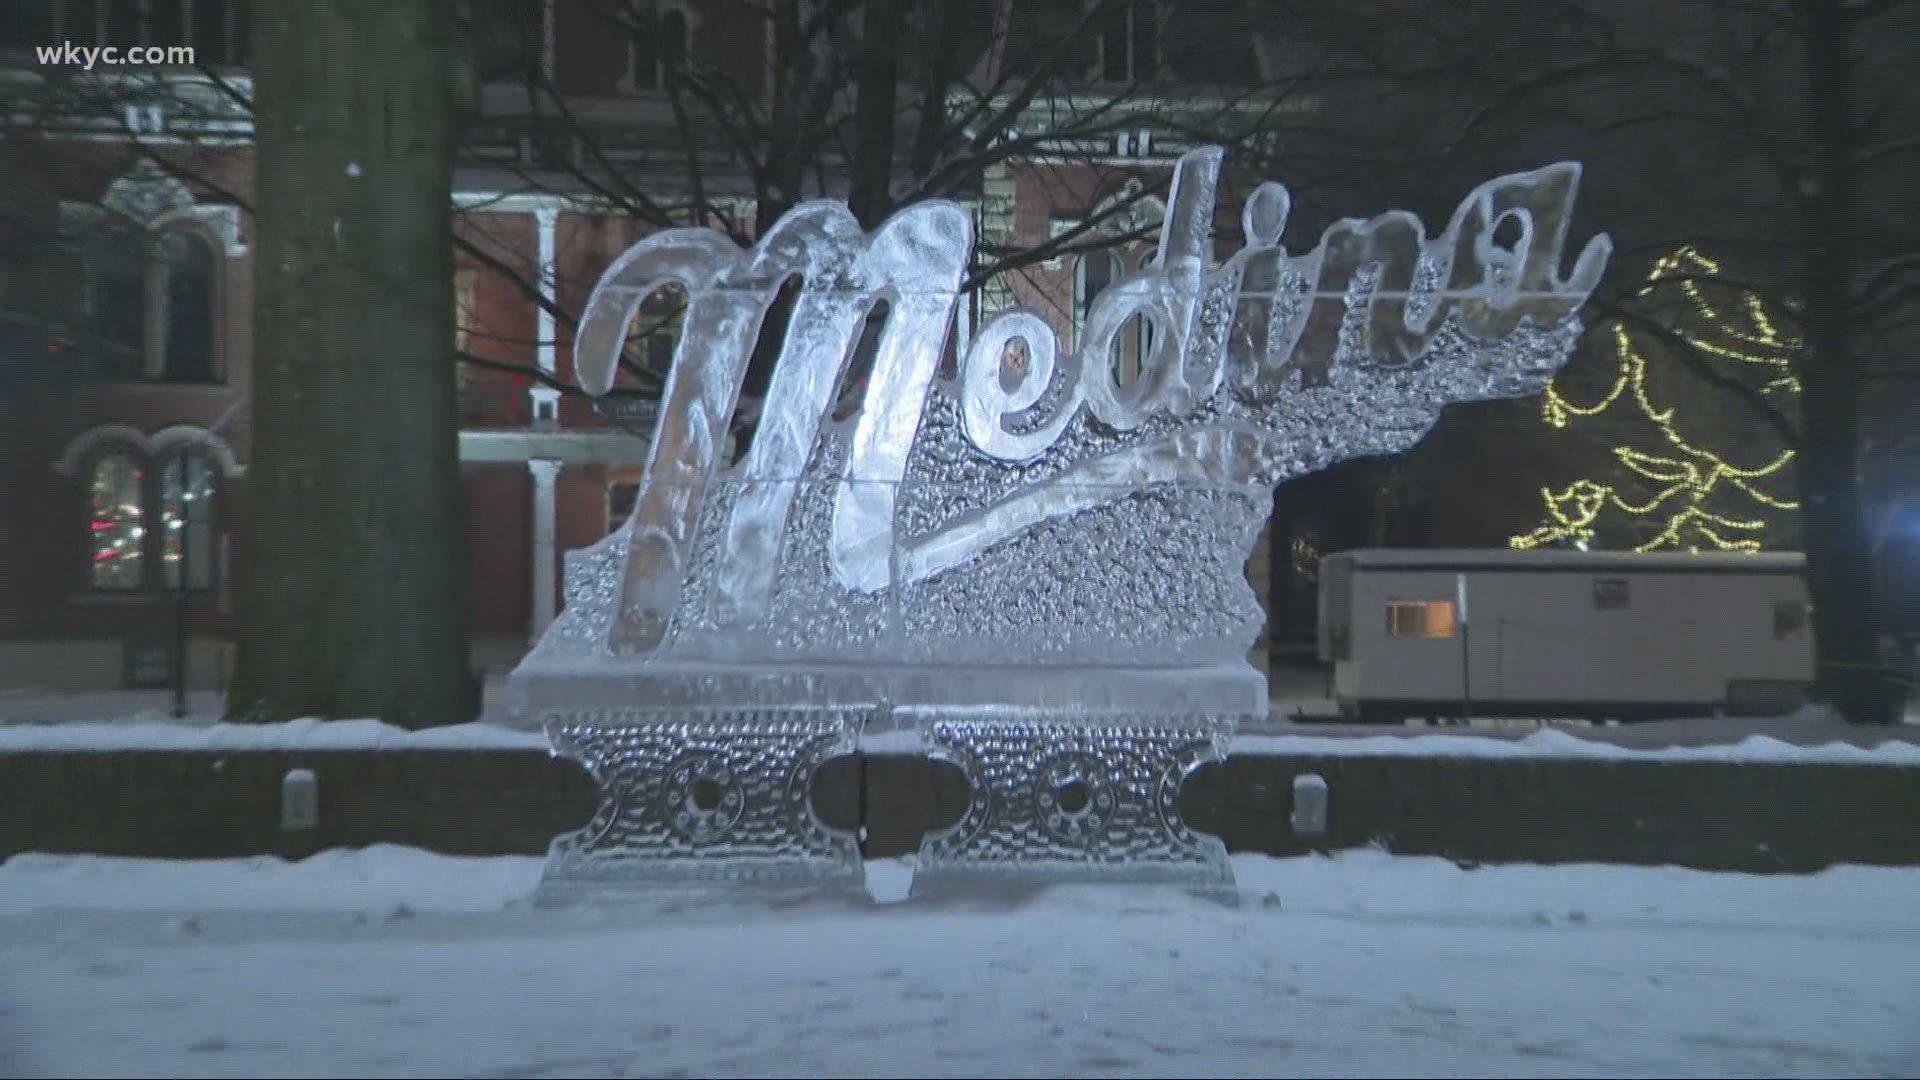 A First Look at The 27th Annual Medina Ice Festival.